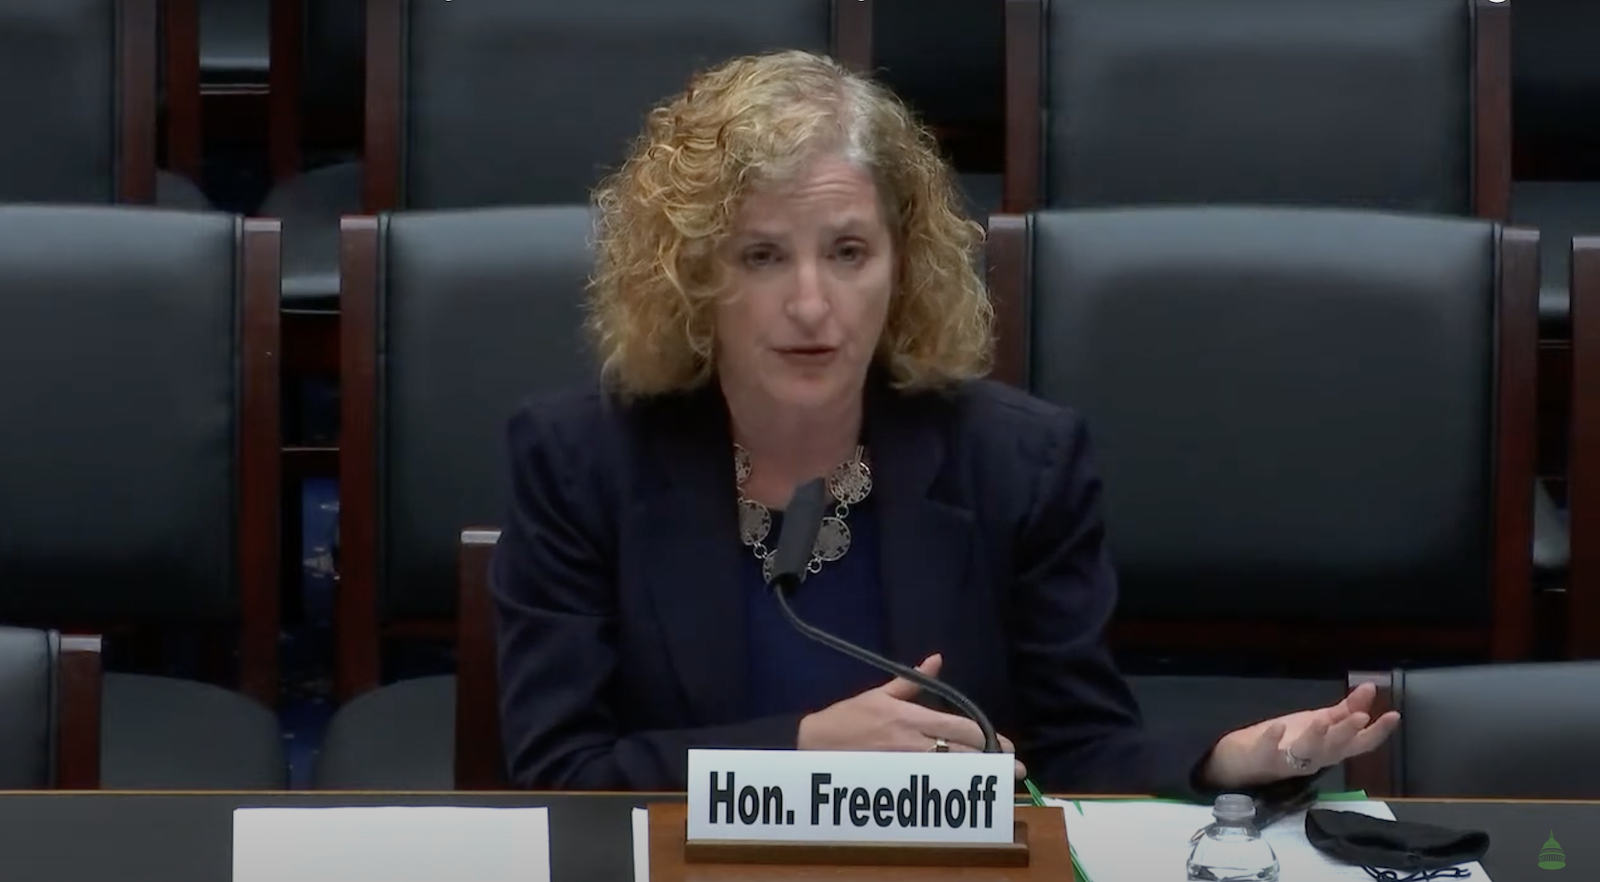 Michal Freedhoff speaks to the House Subcommittee on Environment and Climate Change of the Committee on Oct. 27, 2021.